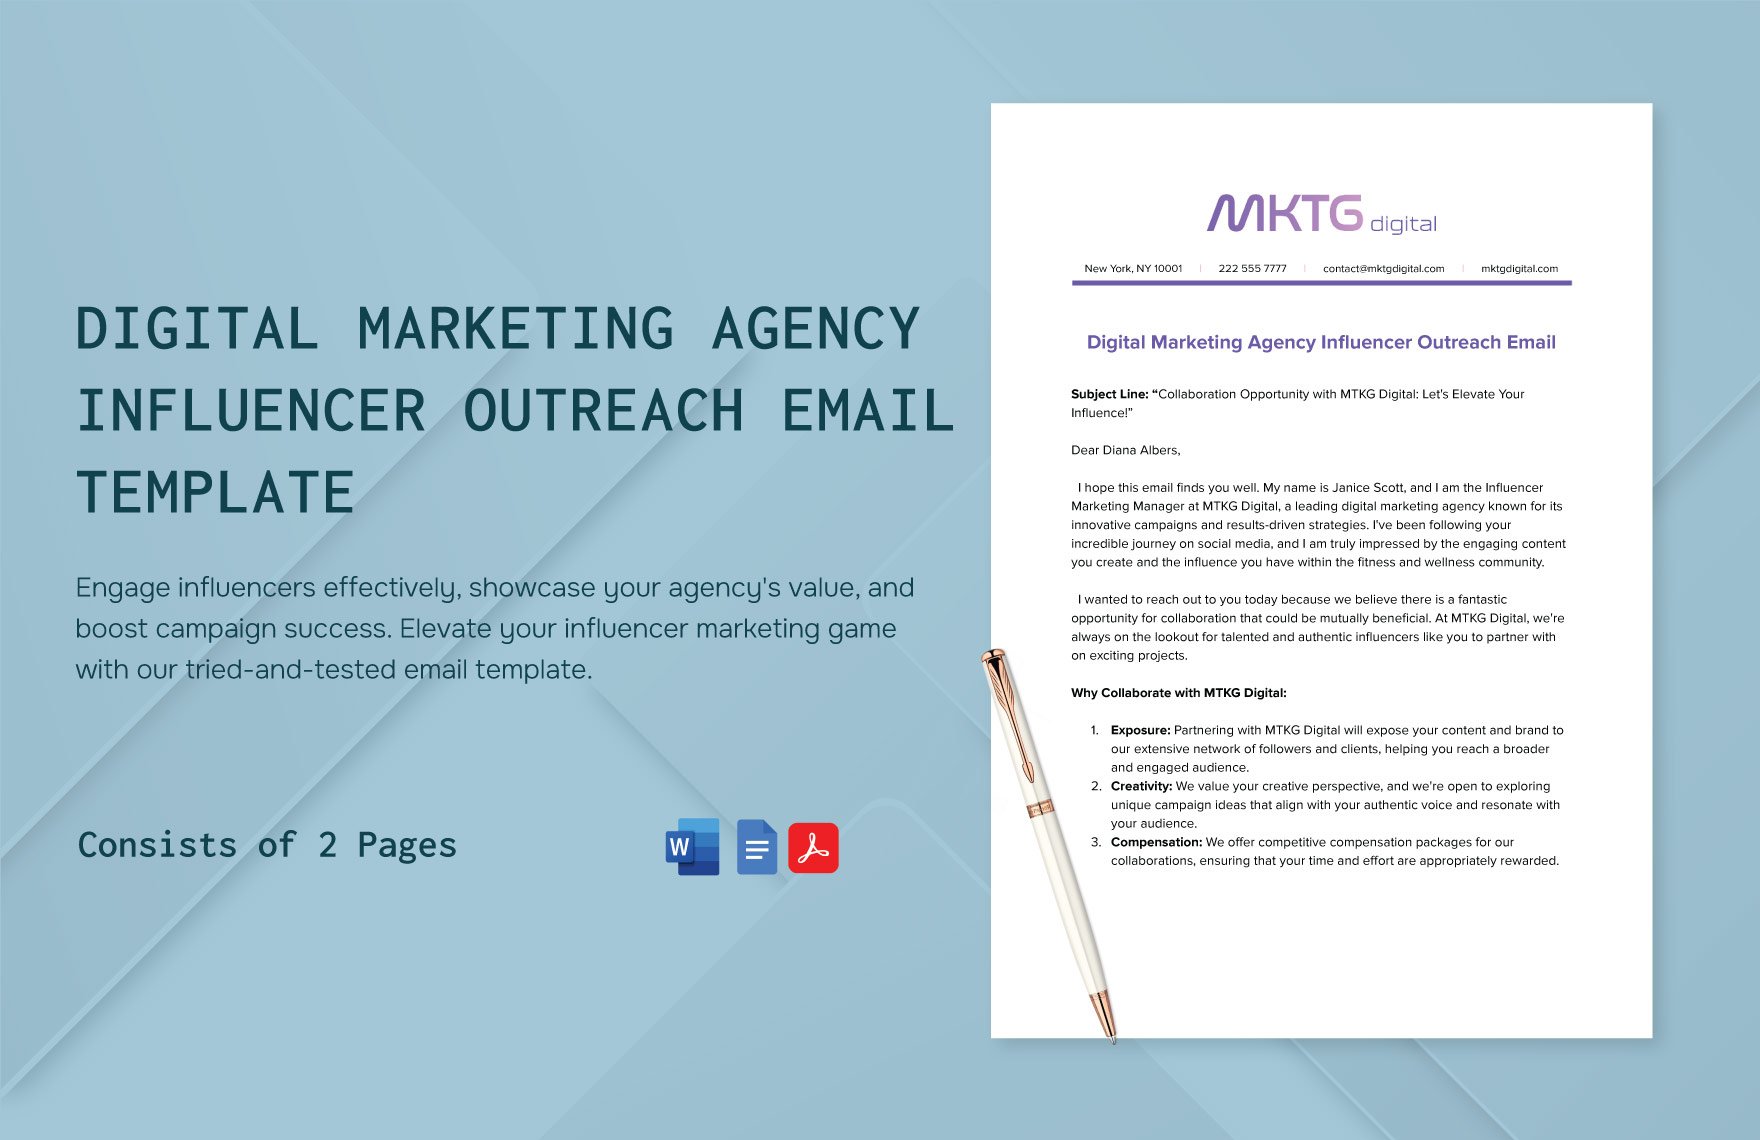 Digital Marketing Agency Influencer Outreach Email Template in Word, Google Docs, PDF